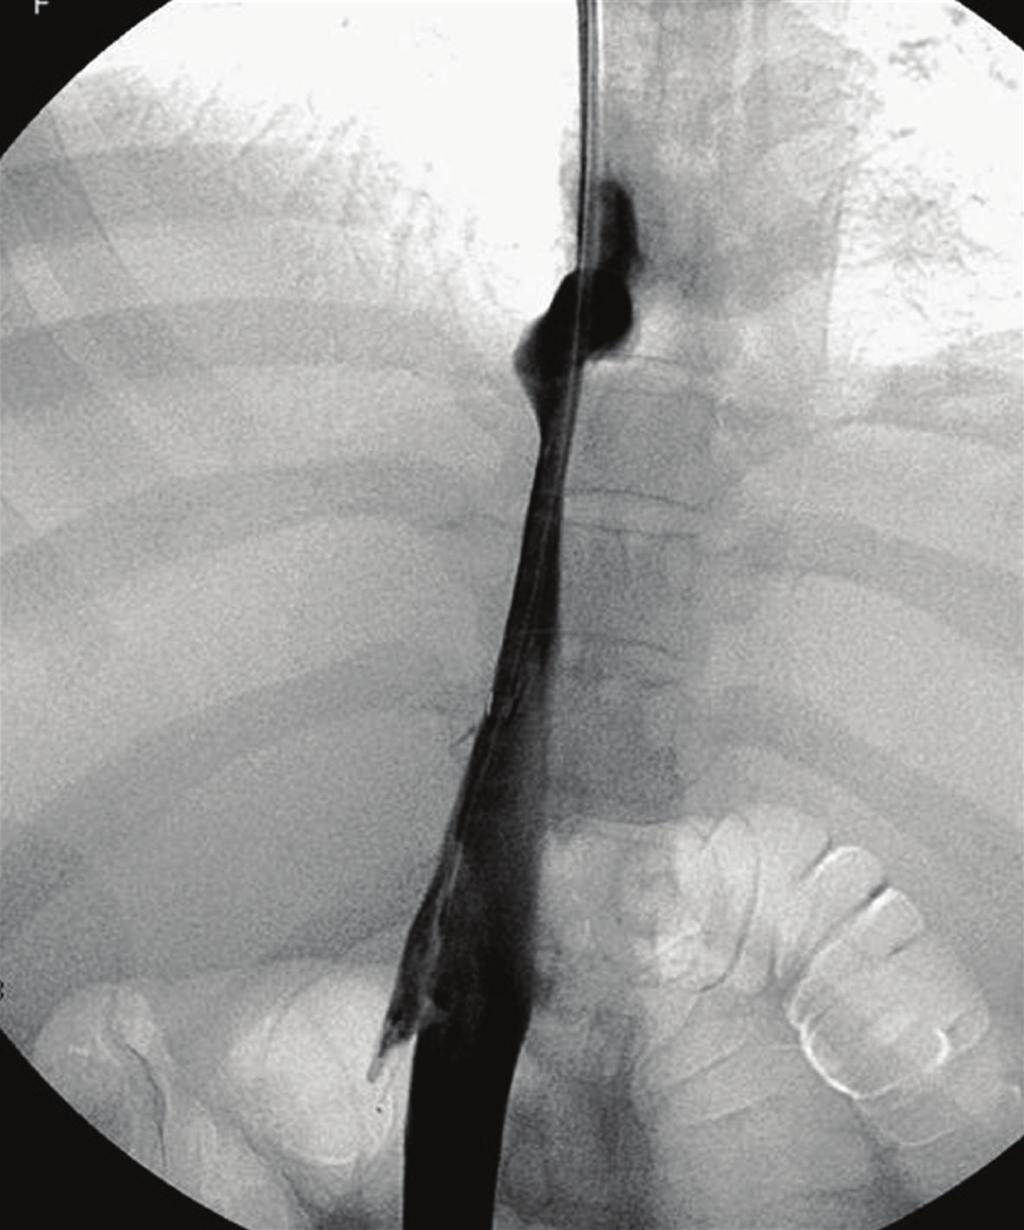 International Journal of Hepatology 7 Figure 8: Cavography in a patient with Budd Chiari syndrome. Note that the right hepatic vein was almost completely occluded (arrow).